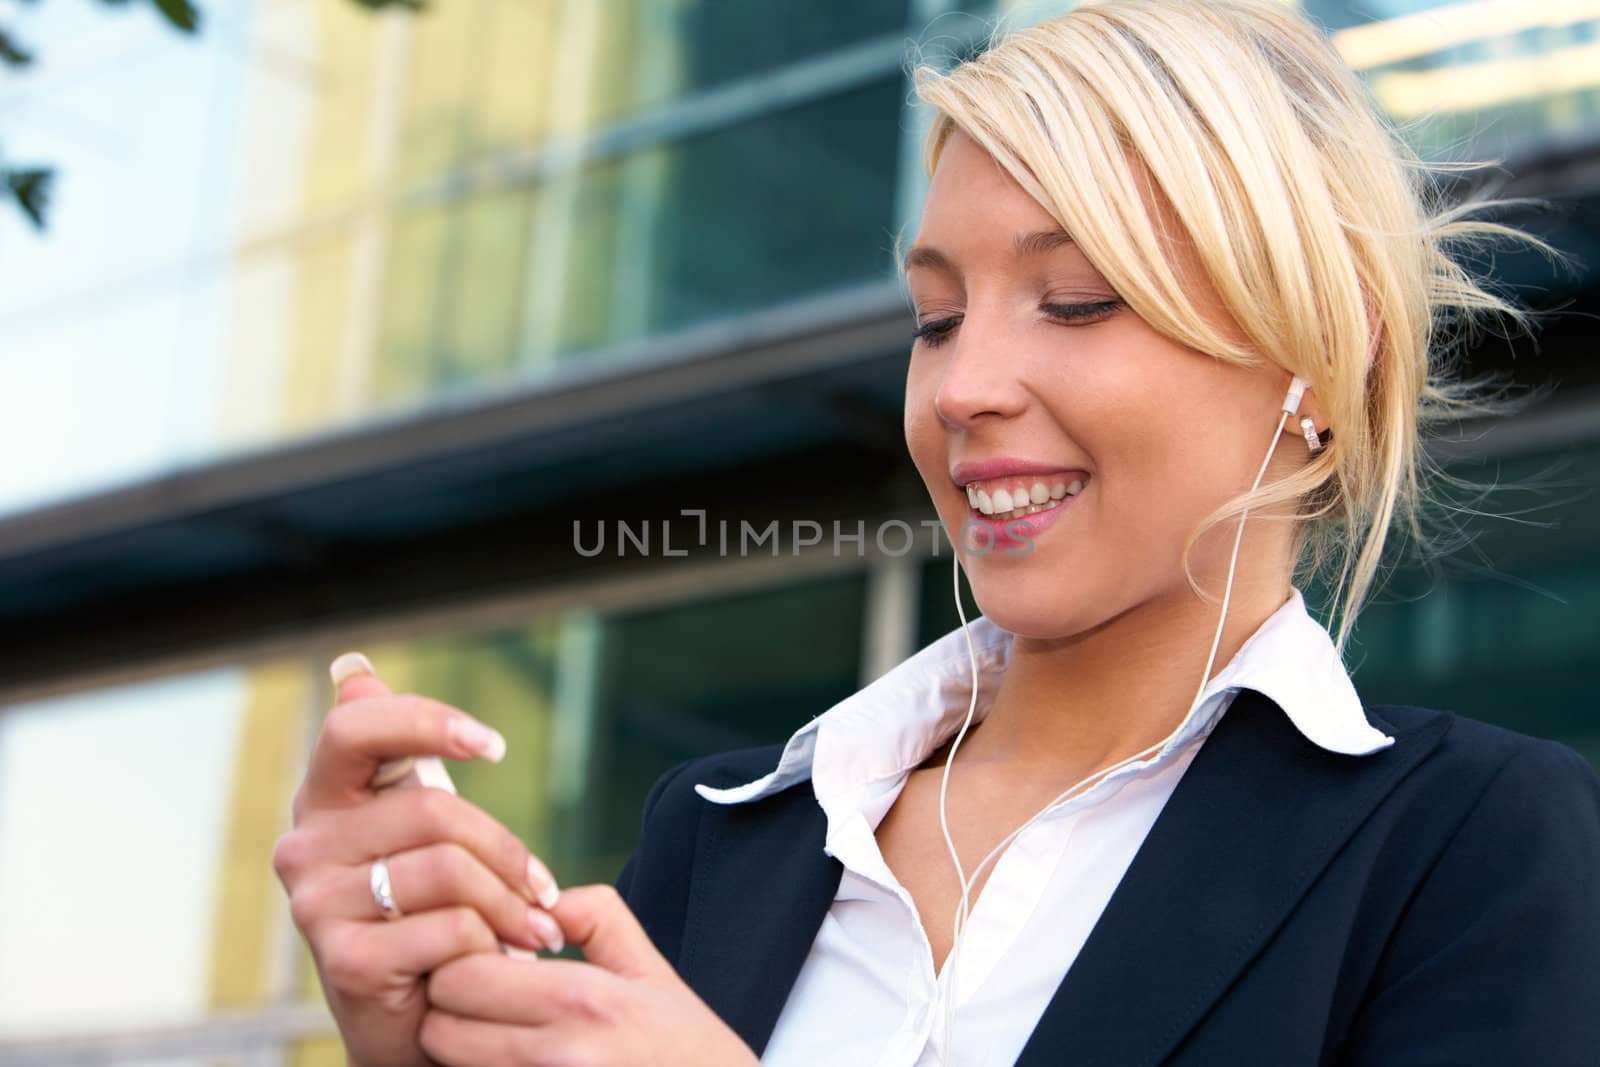 Young businesswoman wearing earphones, holding audio player device